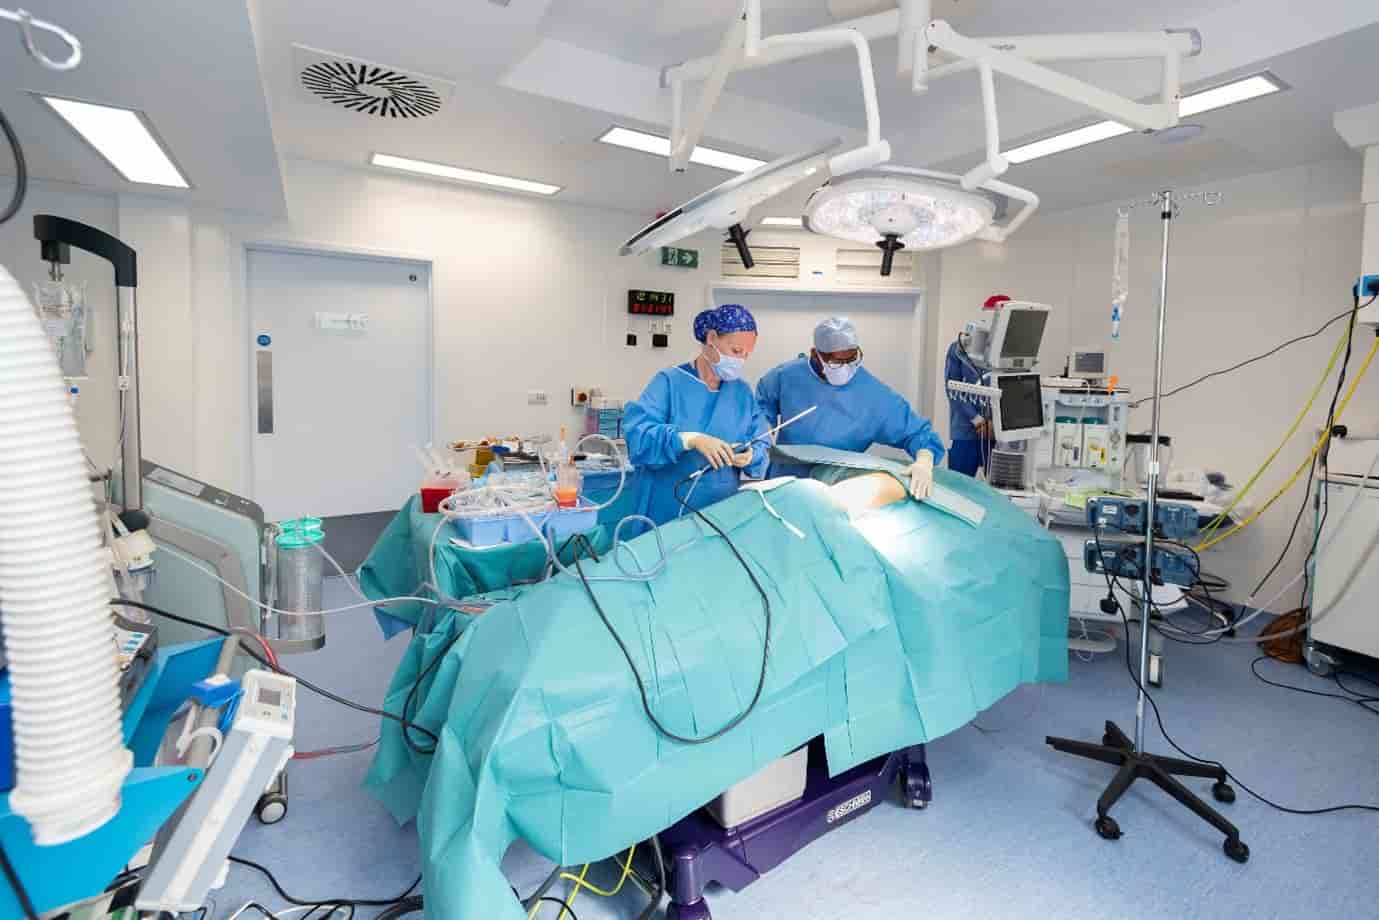 Ms Elena Prousskaia in the operating theatre with another surgeon performing surgery.